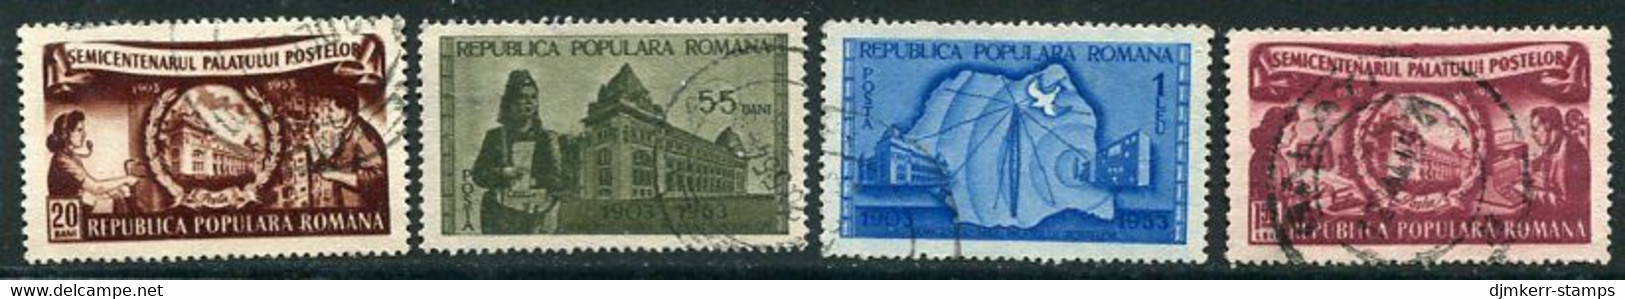 ROMANIA 1953 Post Office Building Used.  Michel 1445-48 - Used Stamps